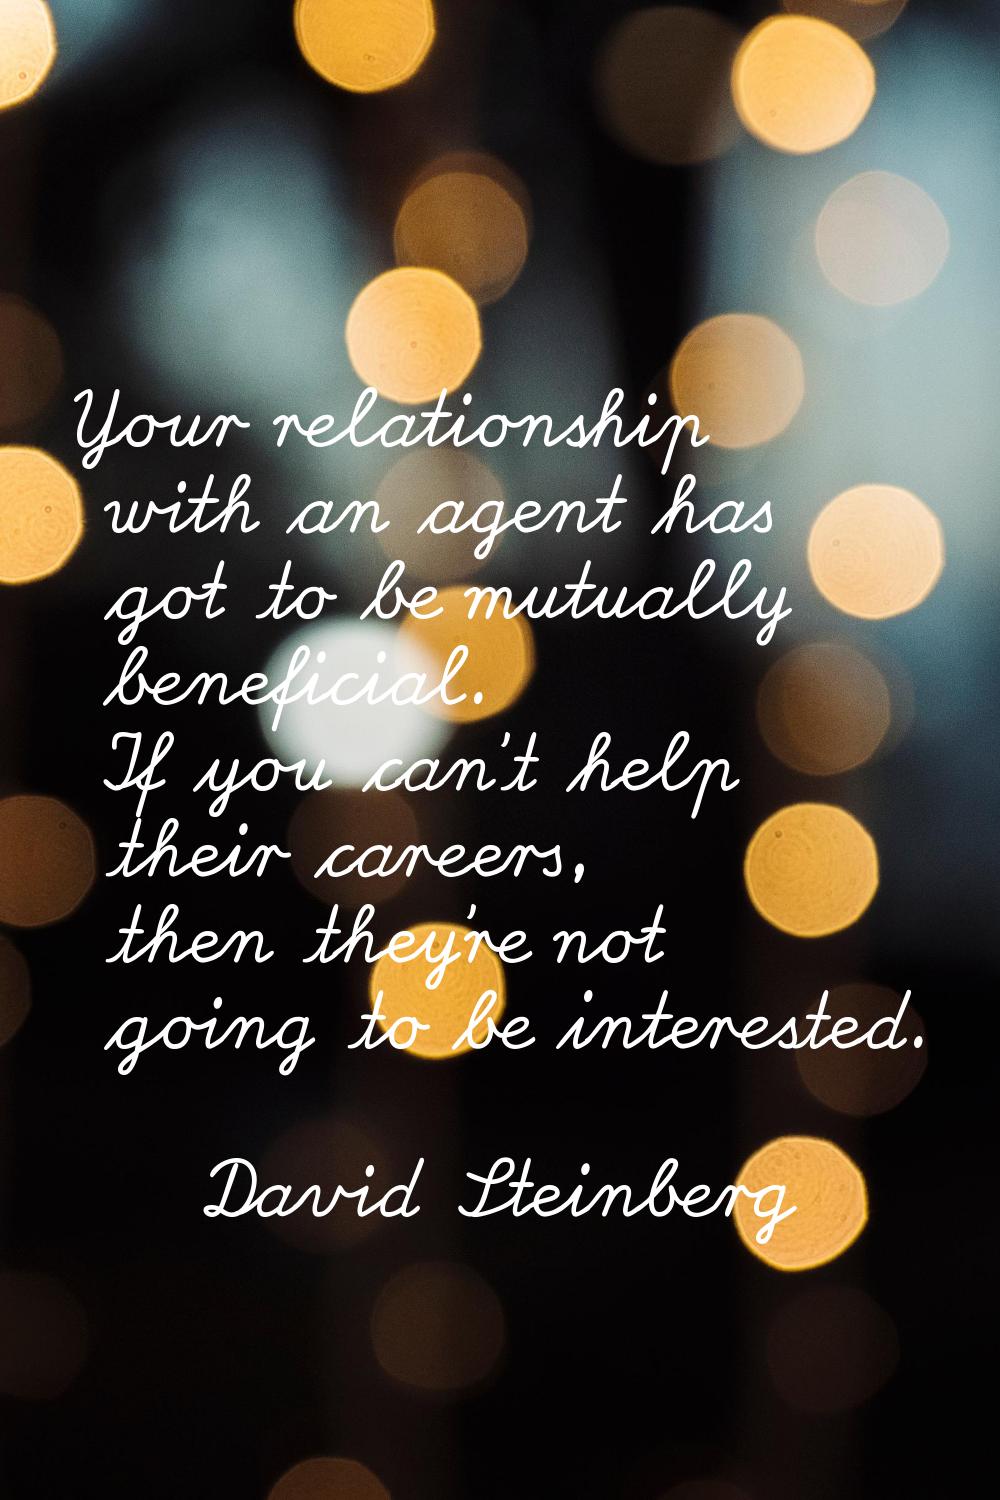 Your relationship with an agent has got to be mutually beneficial. If you can't help their careers,